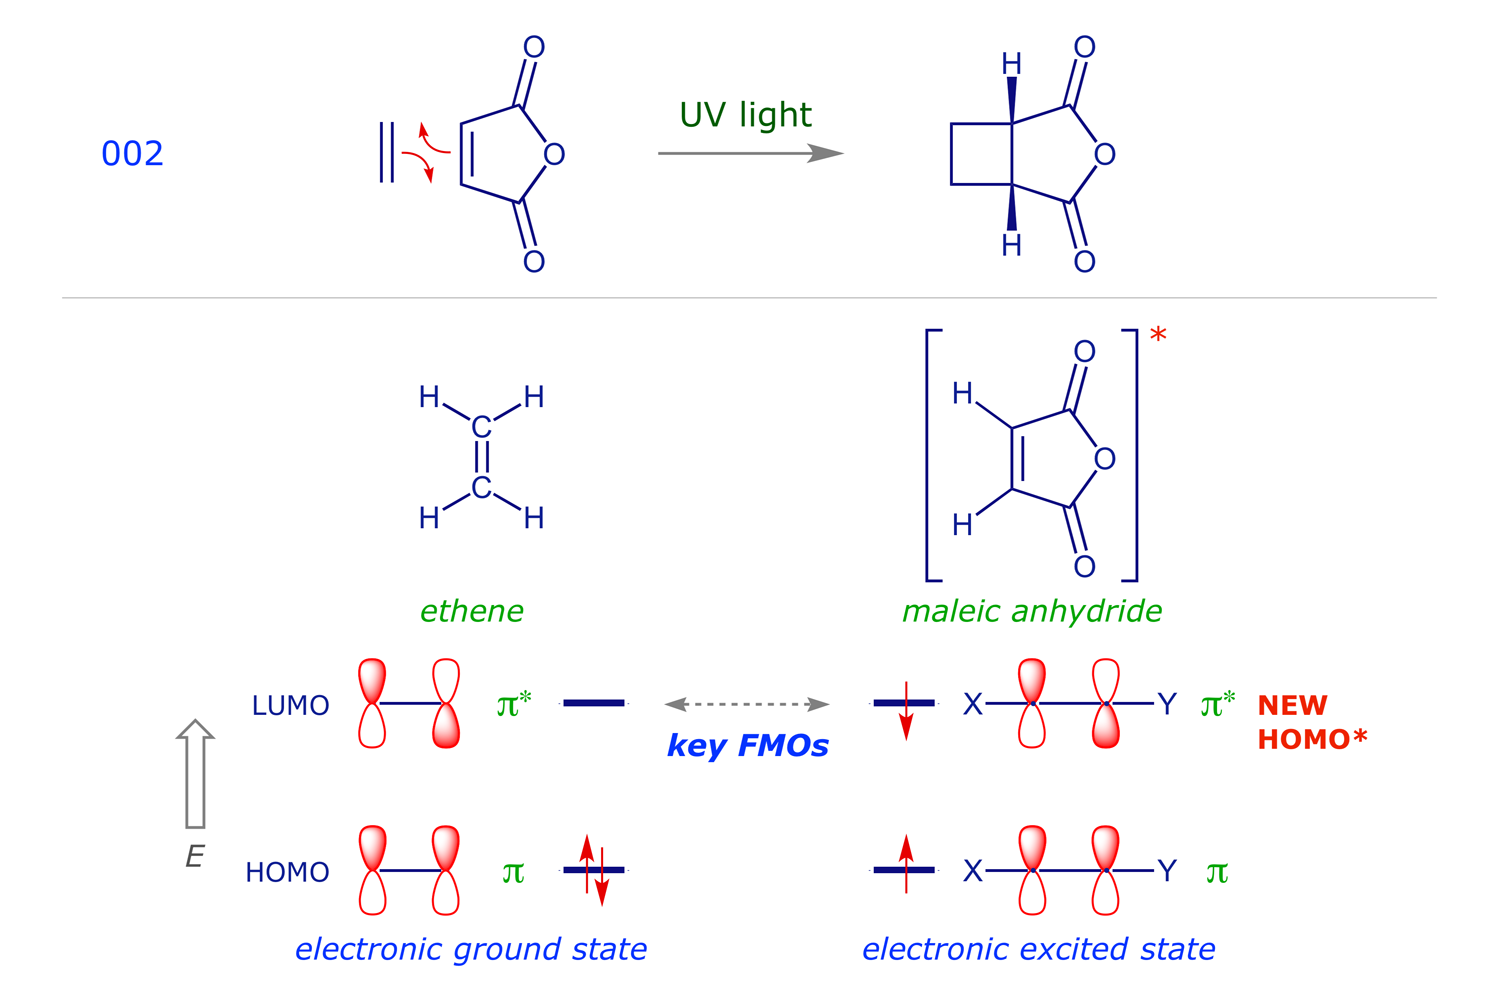 Photochemical [2 + 2] addition of ethene to maleic anhydride